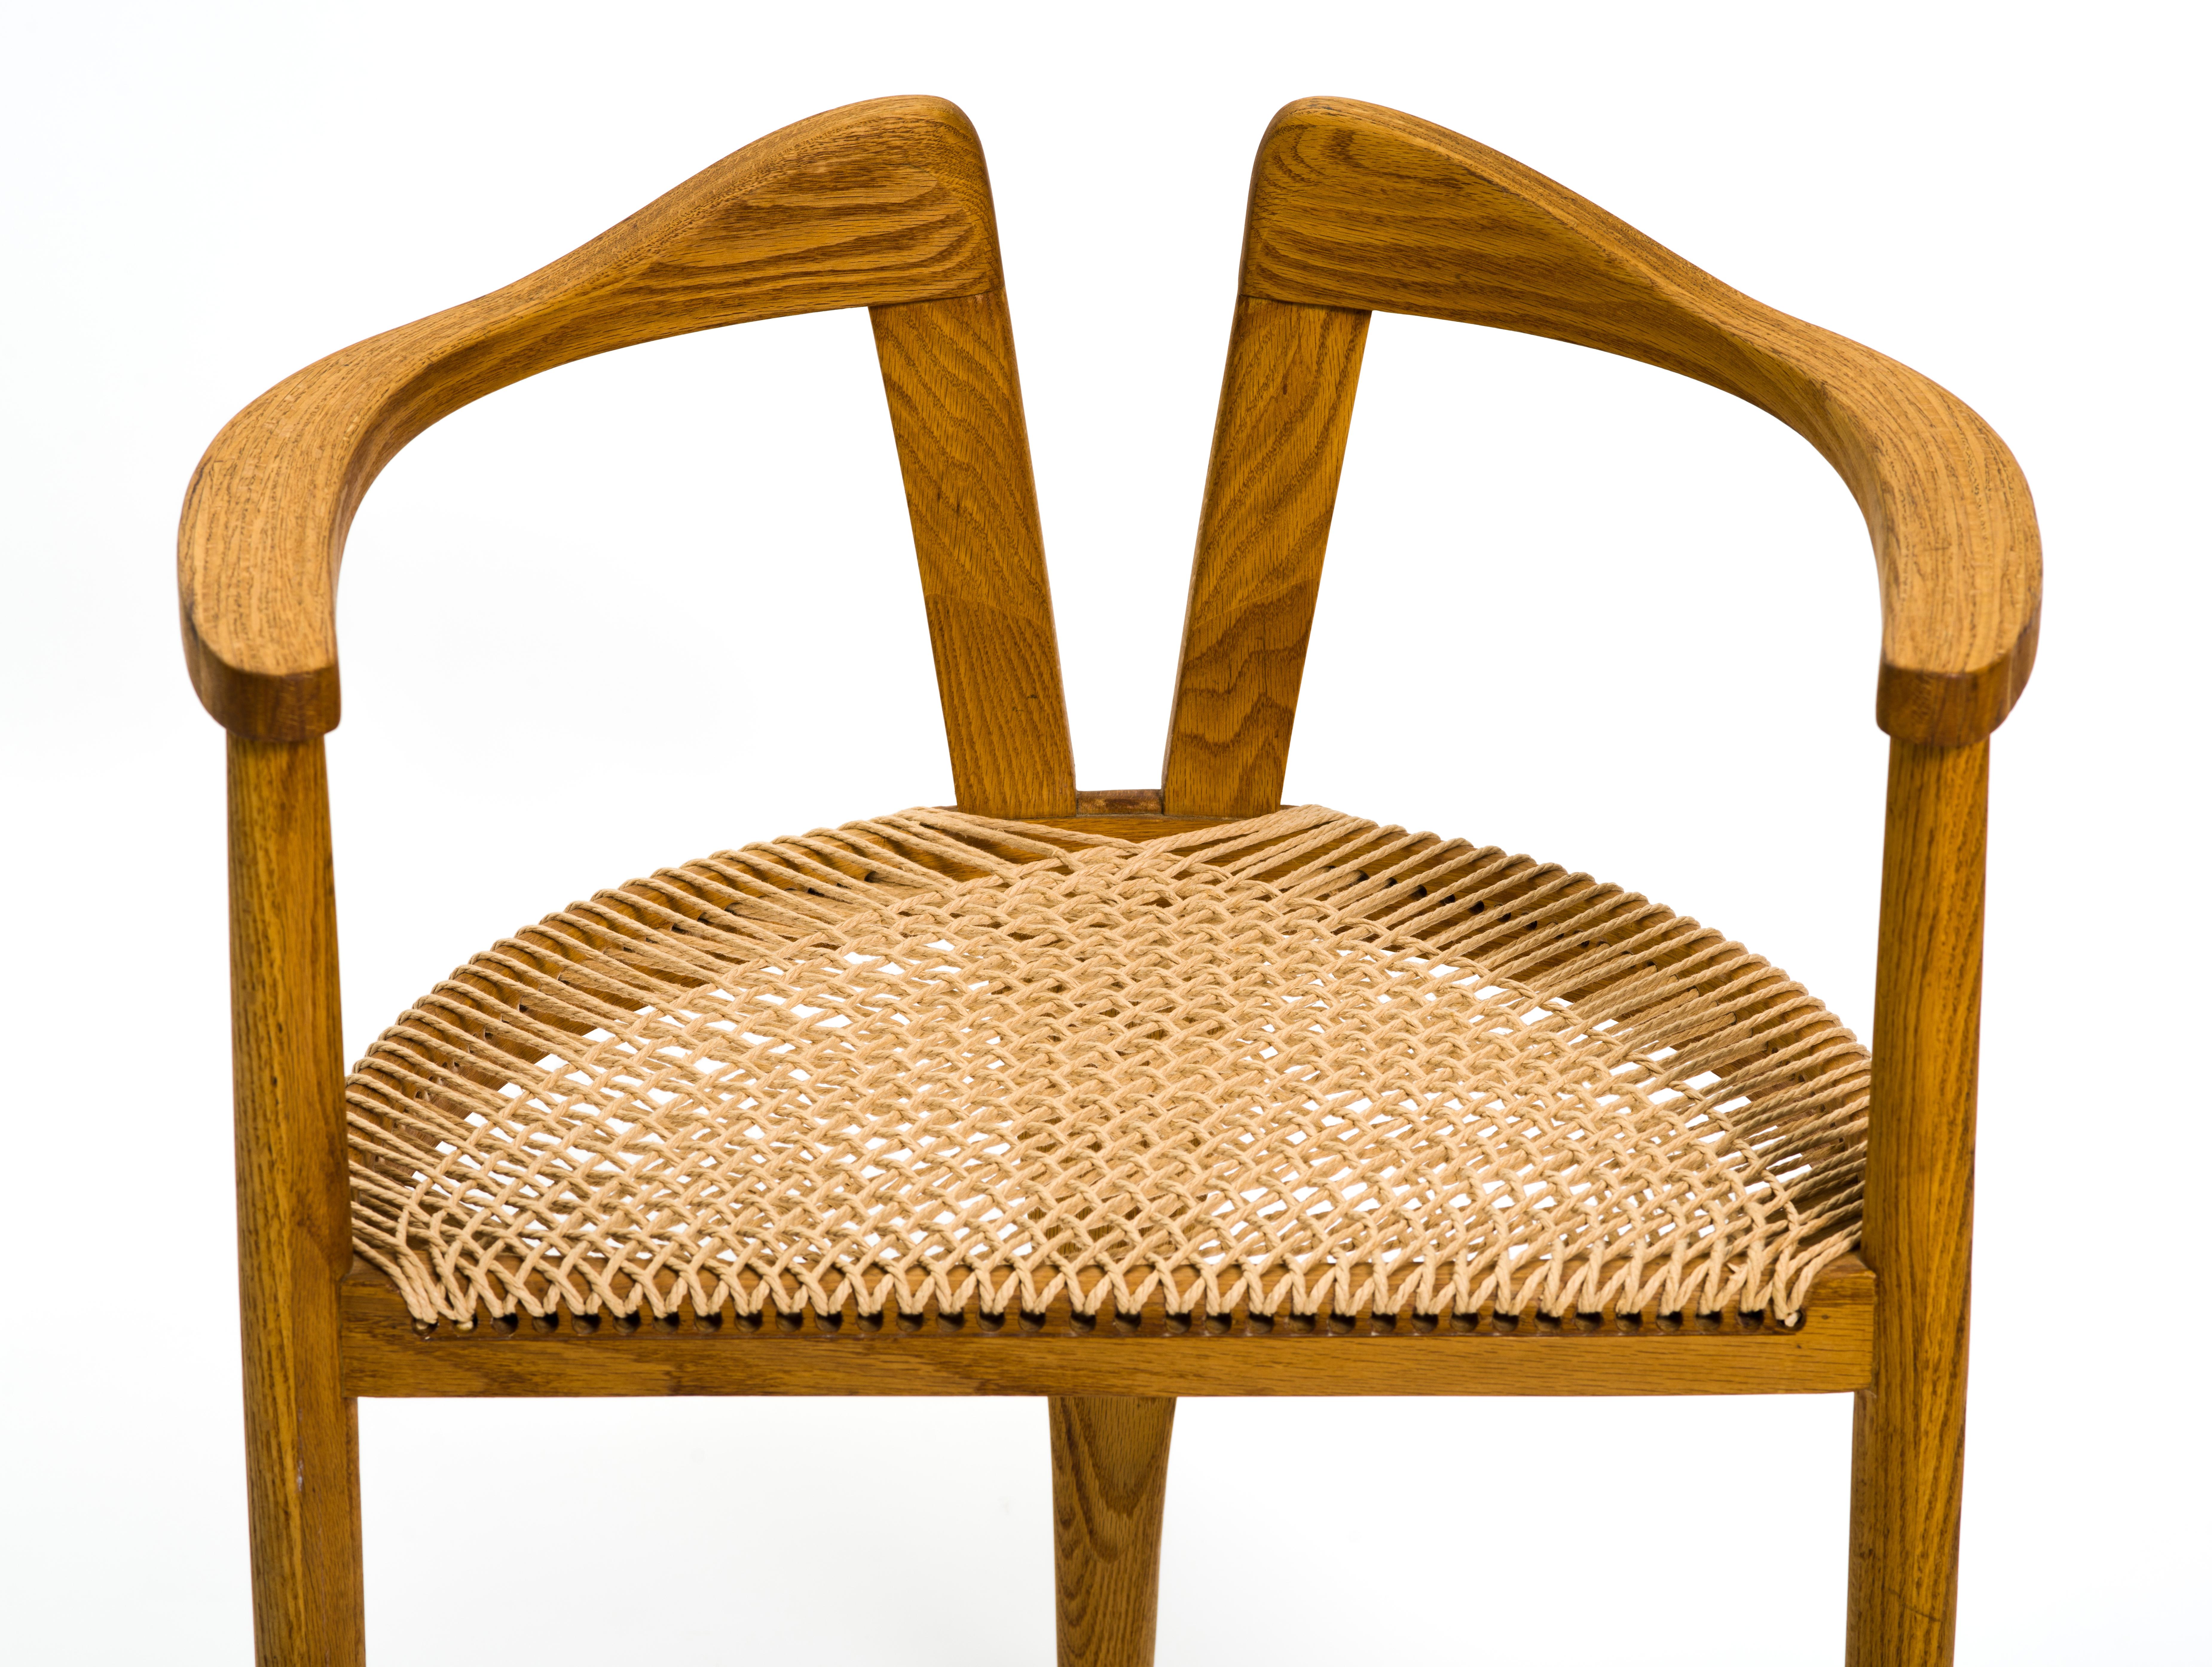 20th Century American Studio Craft Tri-Leg Chair in Oak with Woven Seat after Hans Wegner